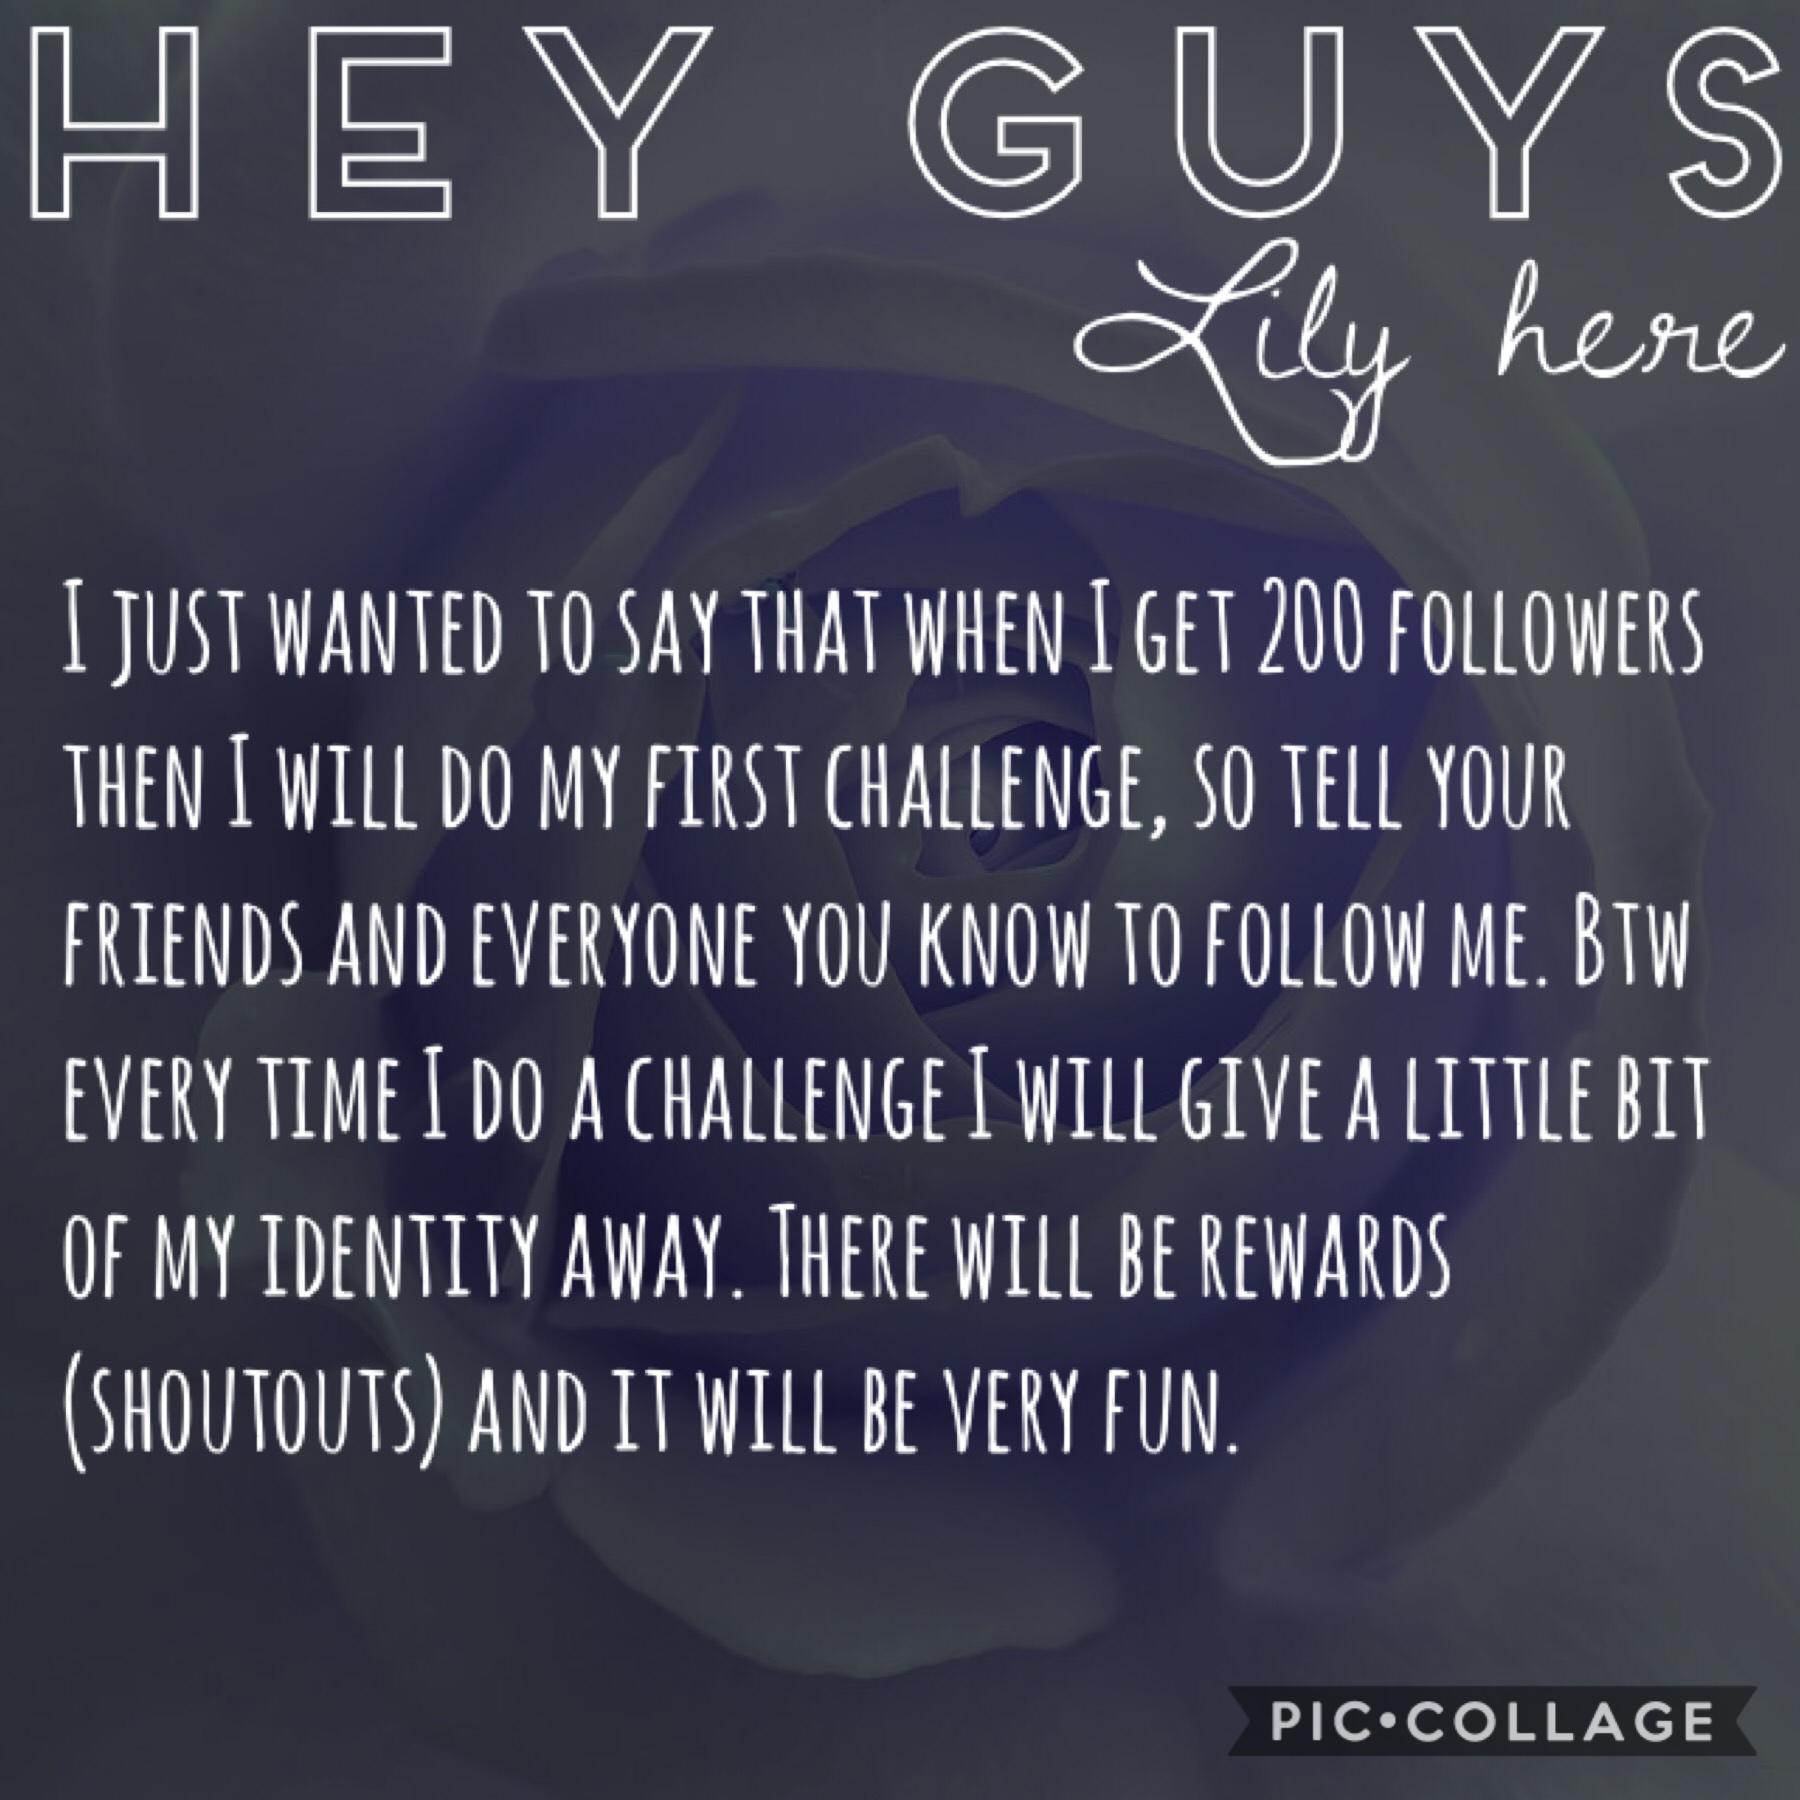 Hey guys (tap)
So I decided that i wanted to do my first competition. Plz give me ideas on what it’s about (come to down below). I was way over exaggerating when I said my identity I will probably just tell u what I like and clues about my main account.

